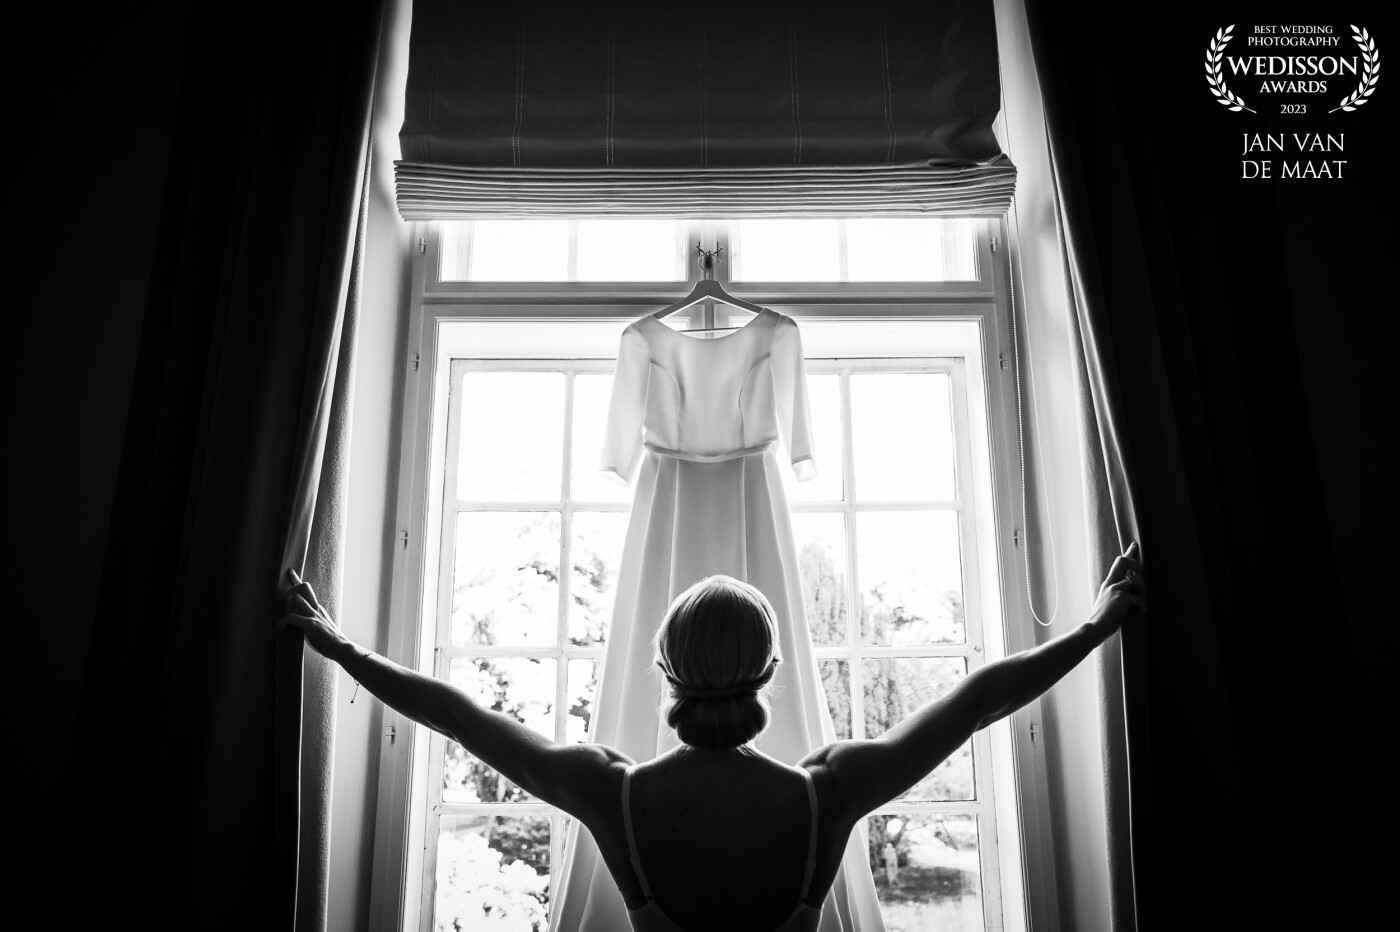 This scene was set in Holckenhavn Slot in Denmark. The bridal room had large windows with curtains so I decided to hang the dress in front of the window and had the bride open up the curtains. Let's get ready for this big day!